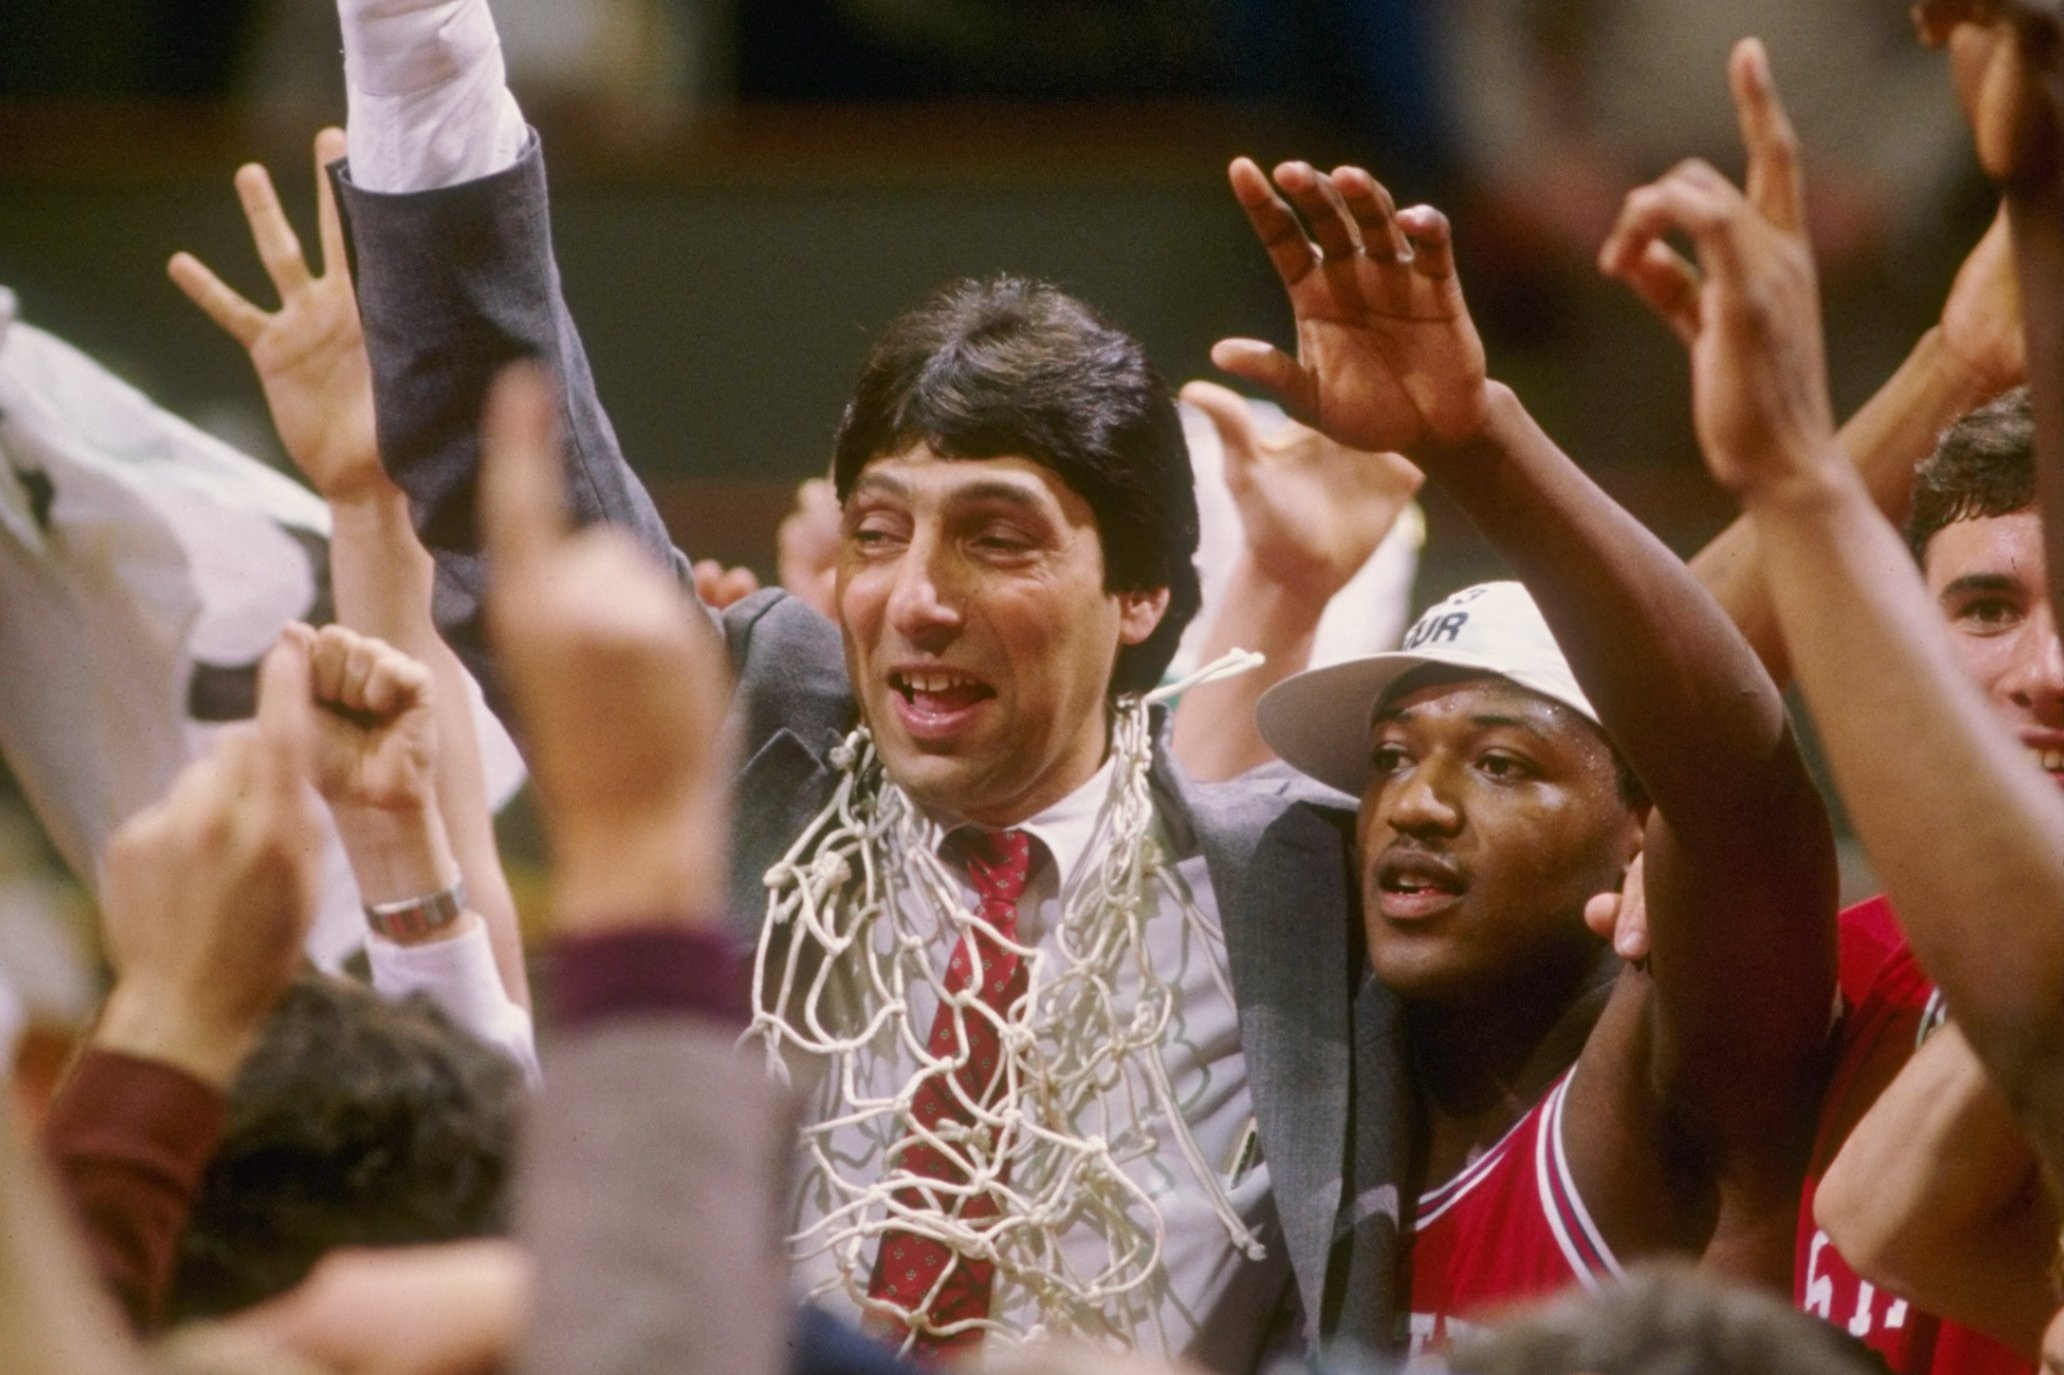 Flashback: ESPN's Williams reflects on 38-point game in Jimmy V